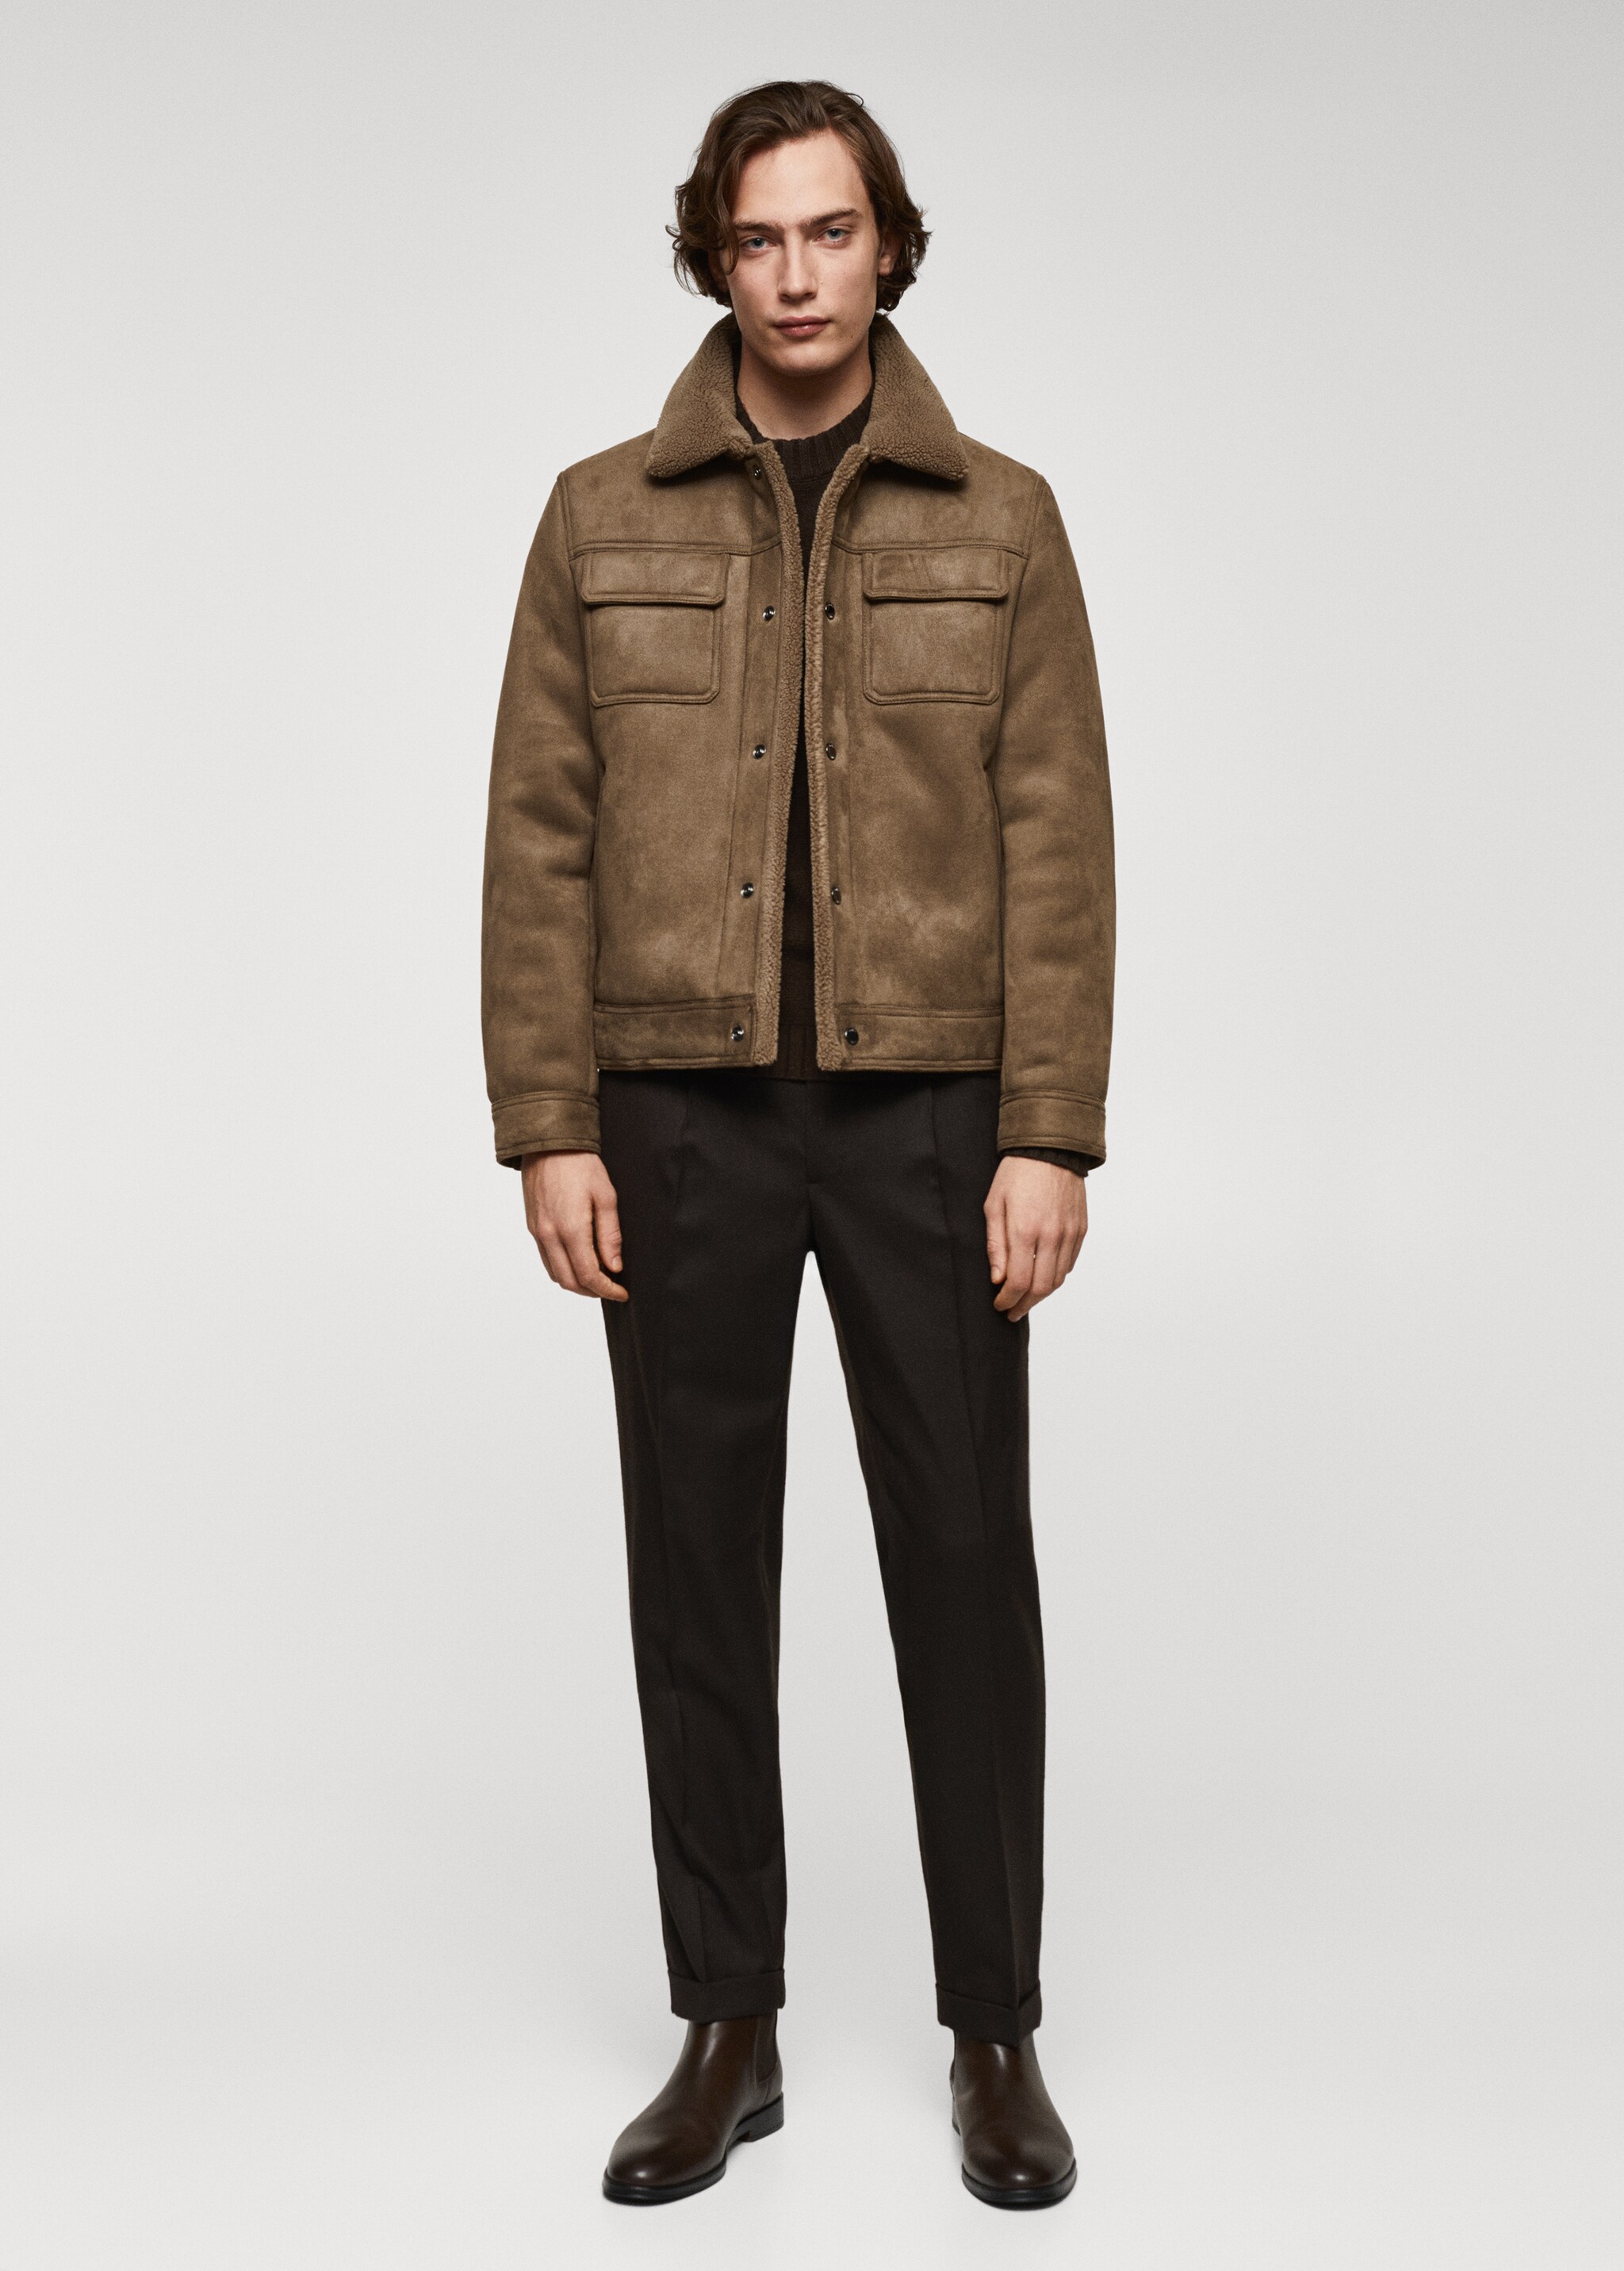 Shearling-lined jacket - General plane